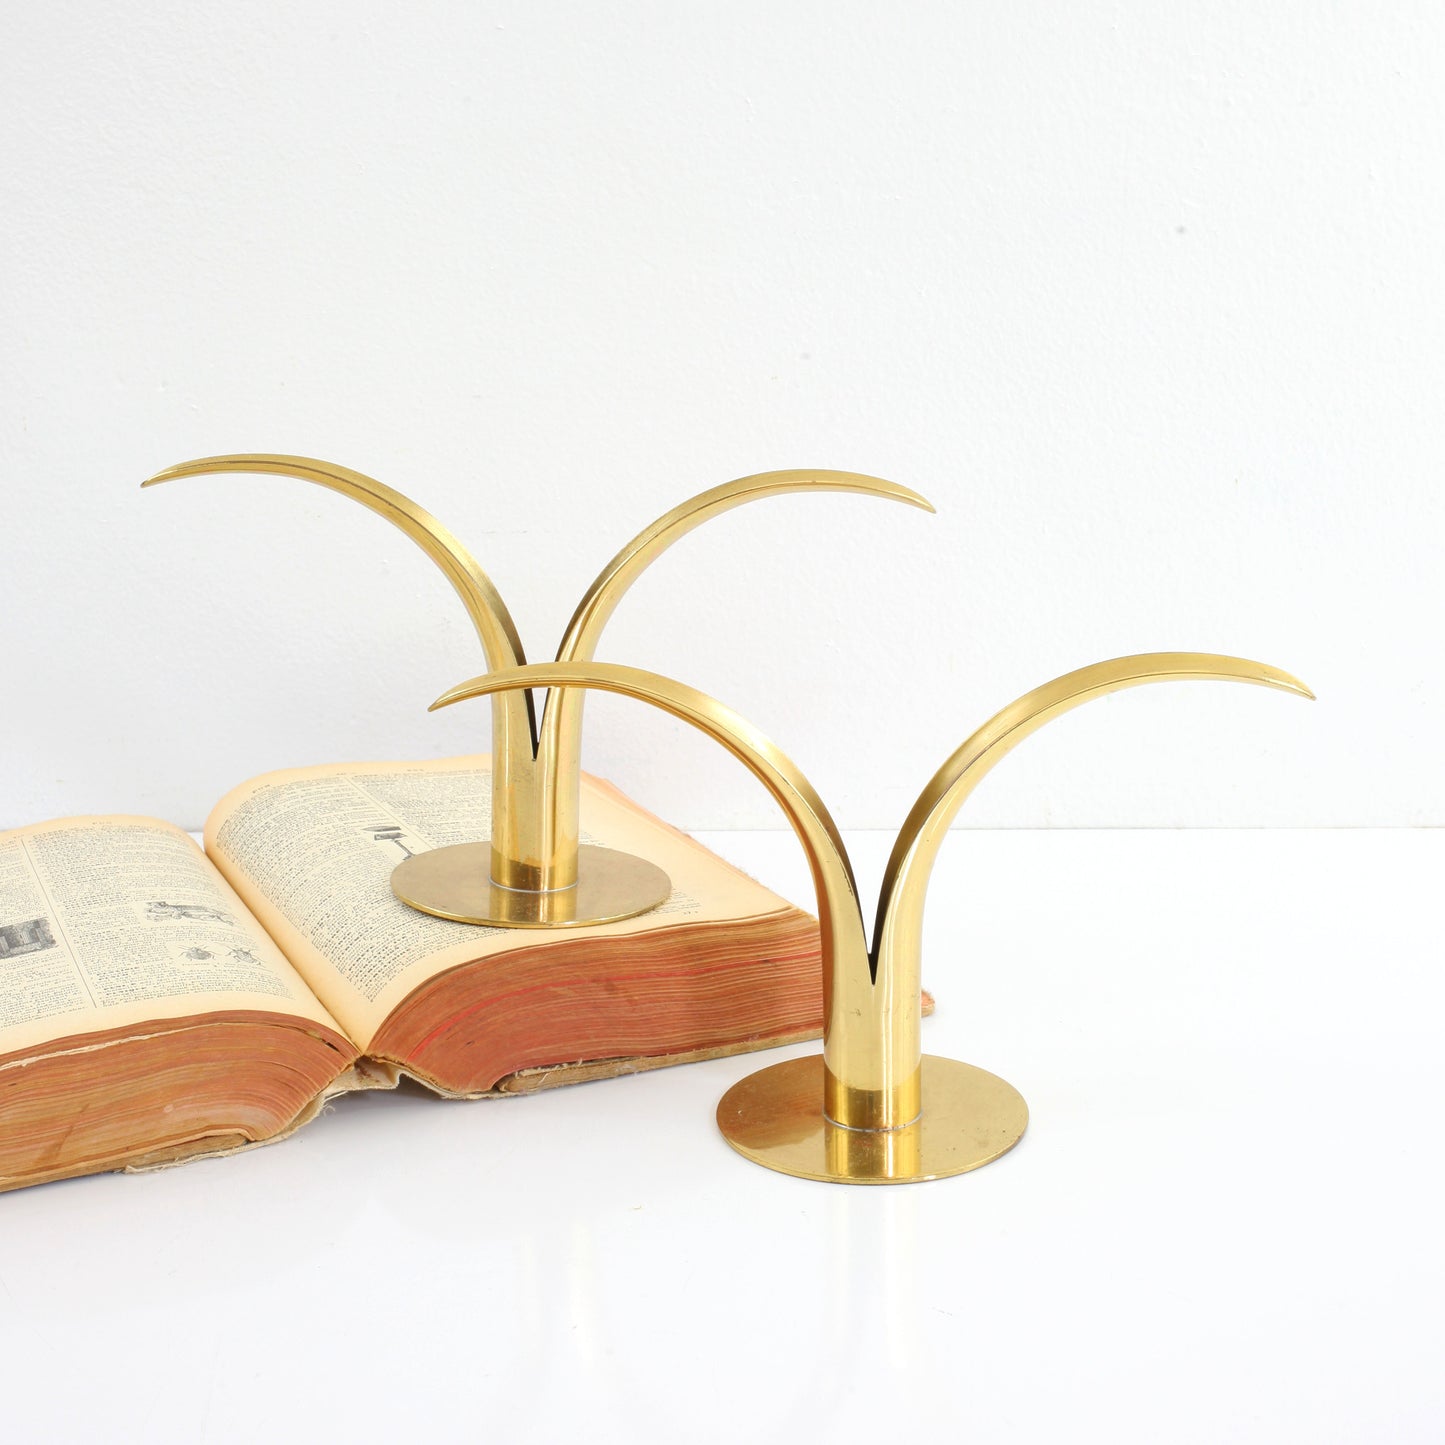 SOLD - Mid Century Modern Ystad Sweden Brass Lily Candle Holders